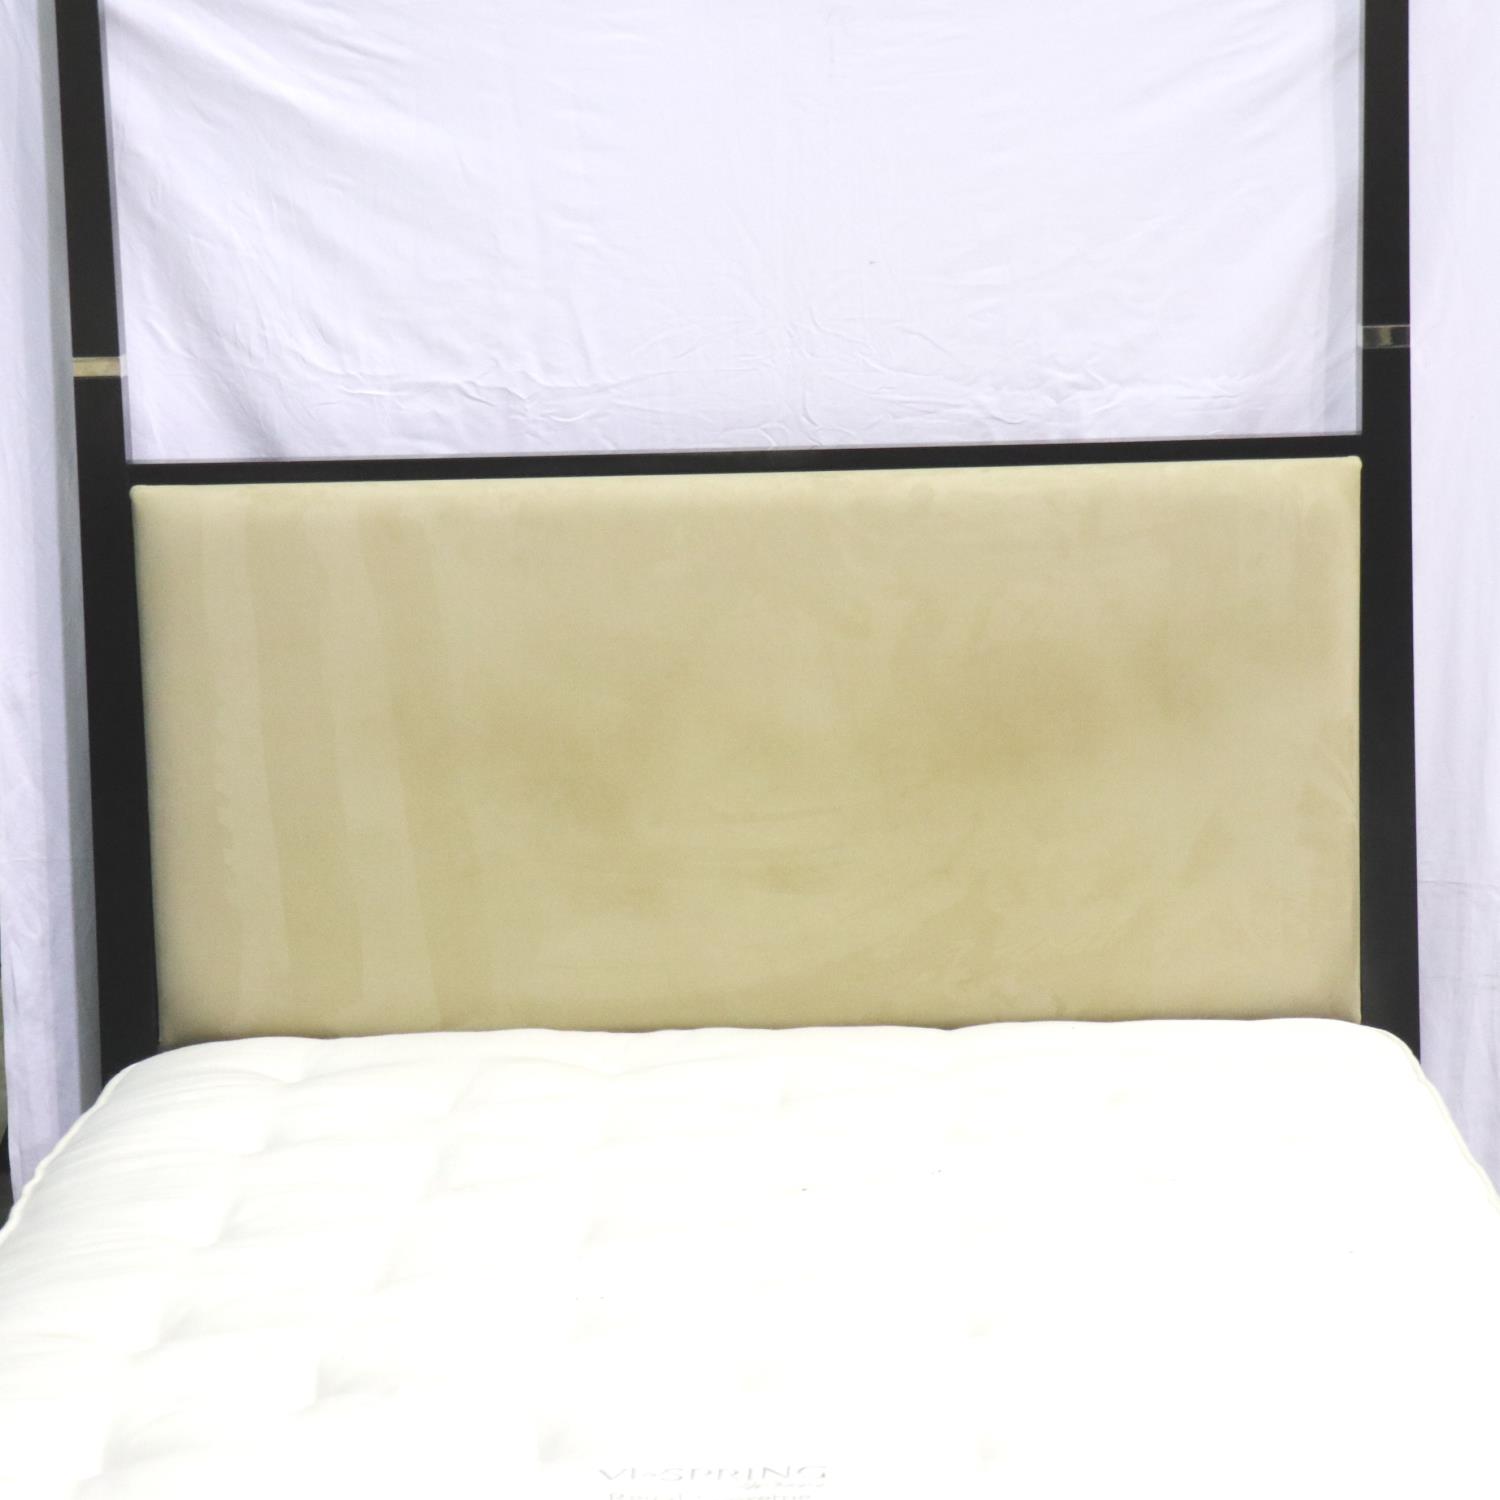 A contemporary king size bed frame with suede effect headboard and vi-spring mattress, light usage